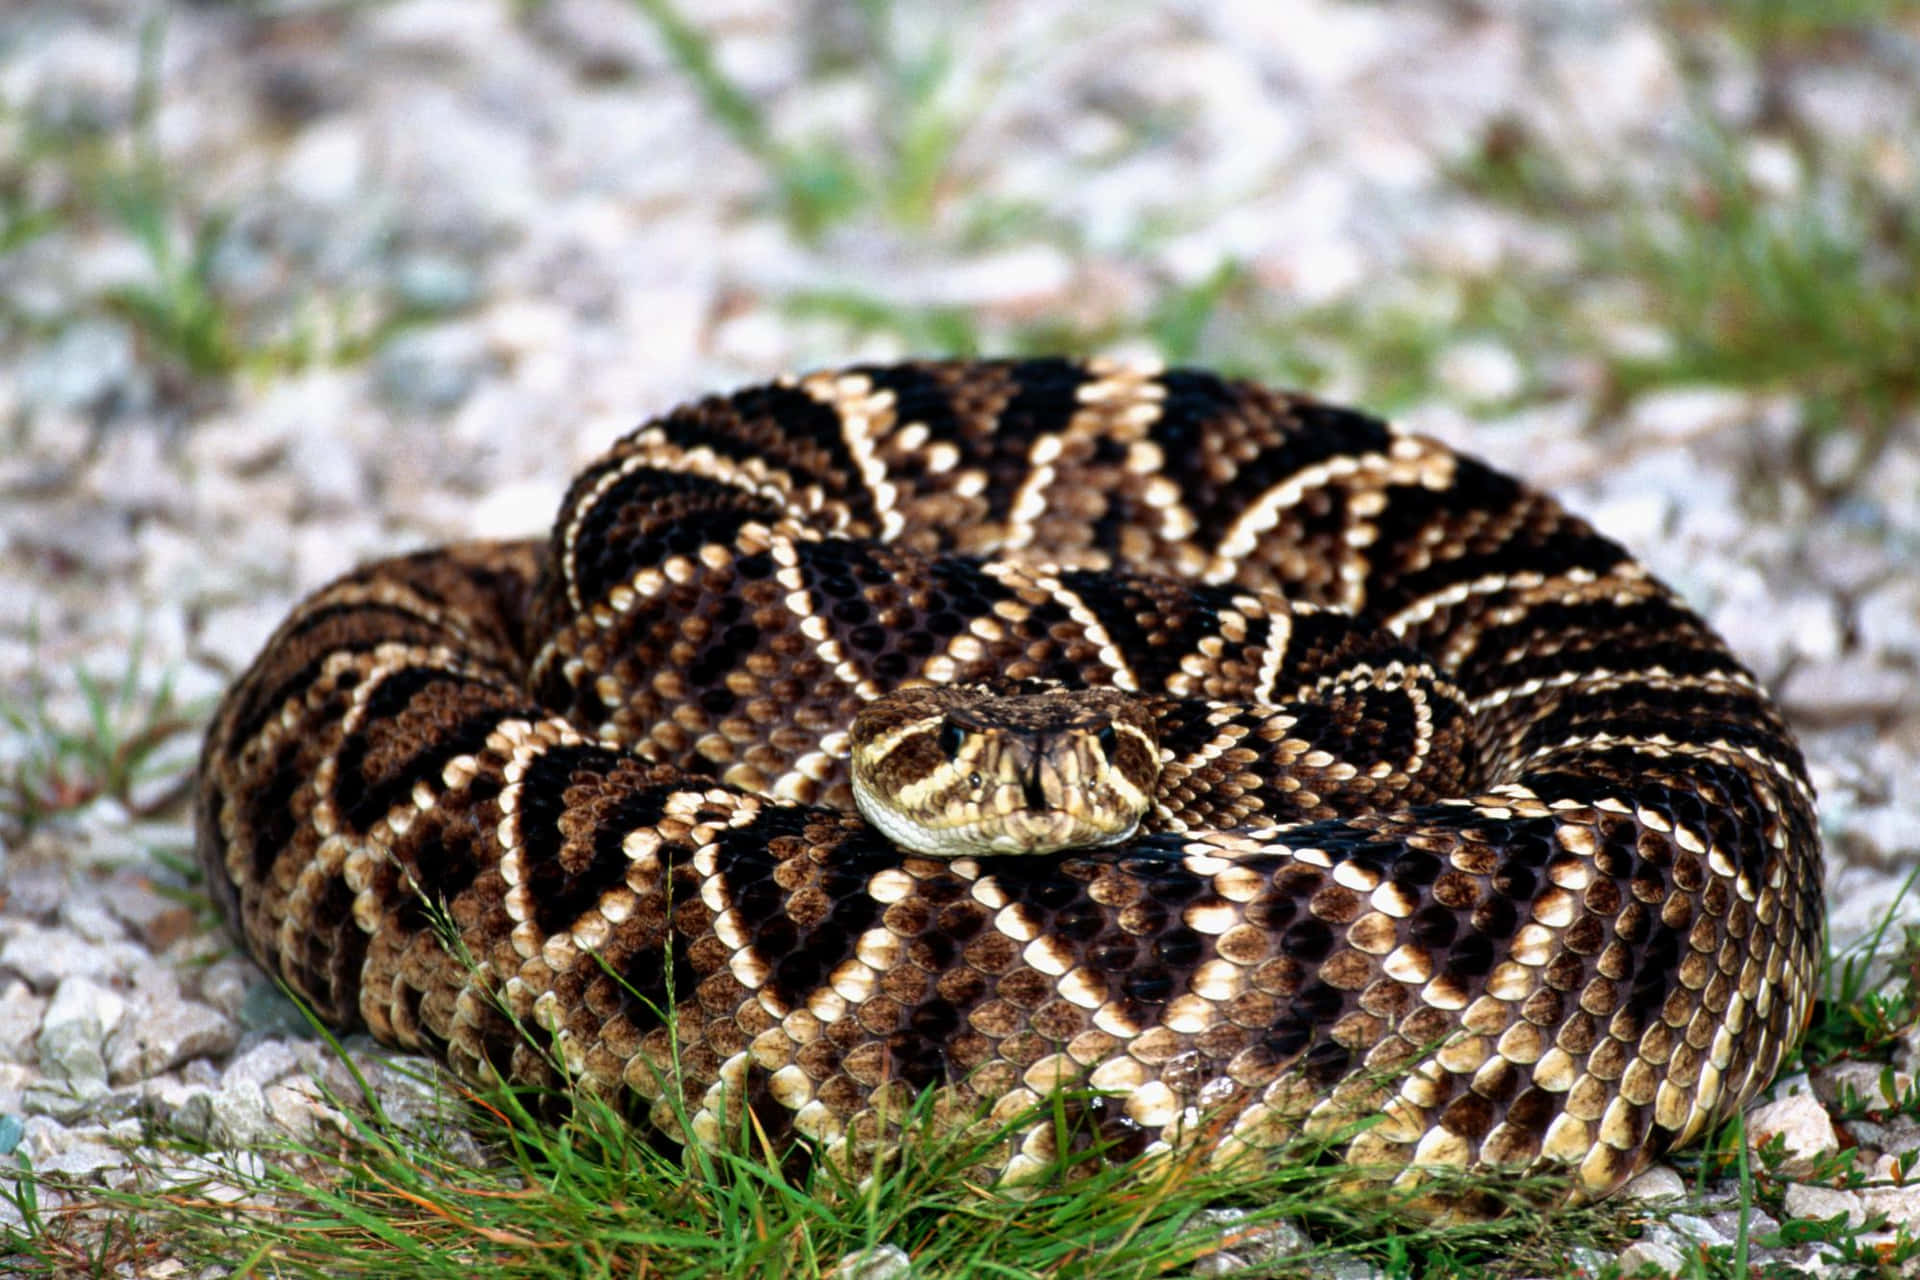 Close-up view of a Brown Snake in its natural habitat Wallpaper